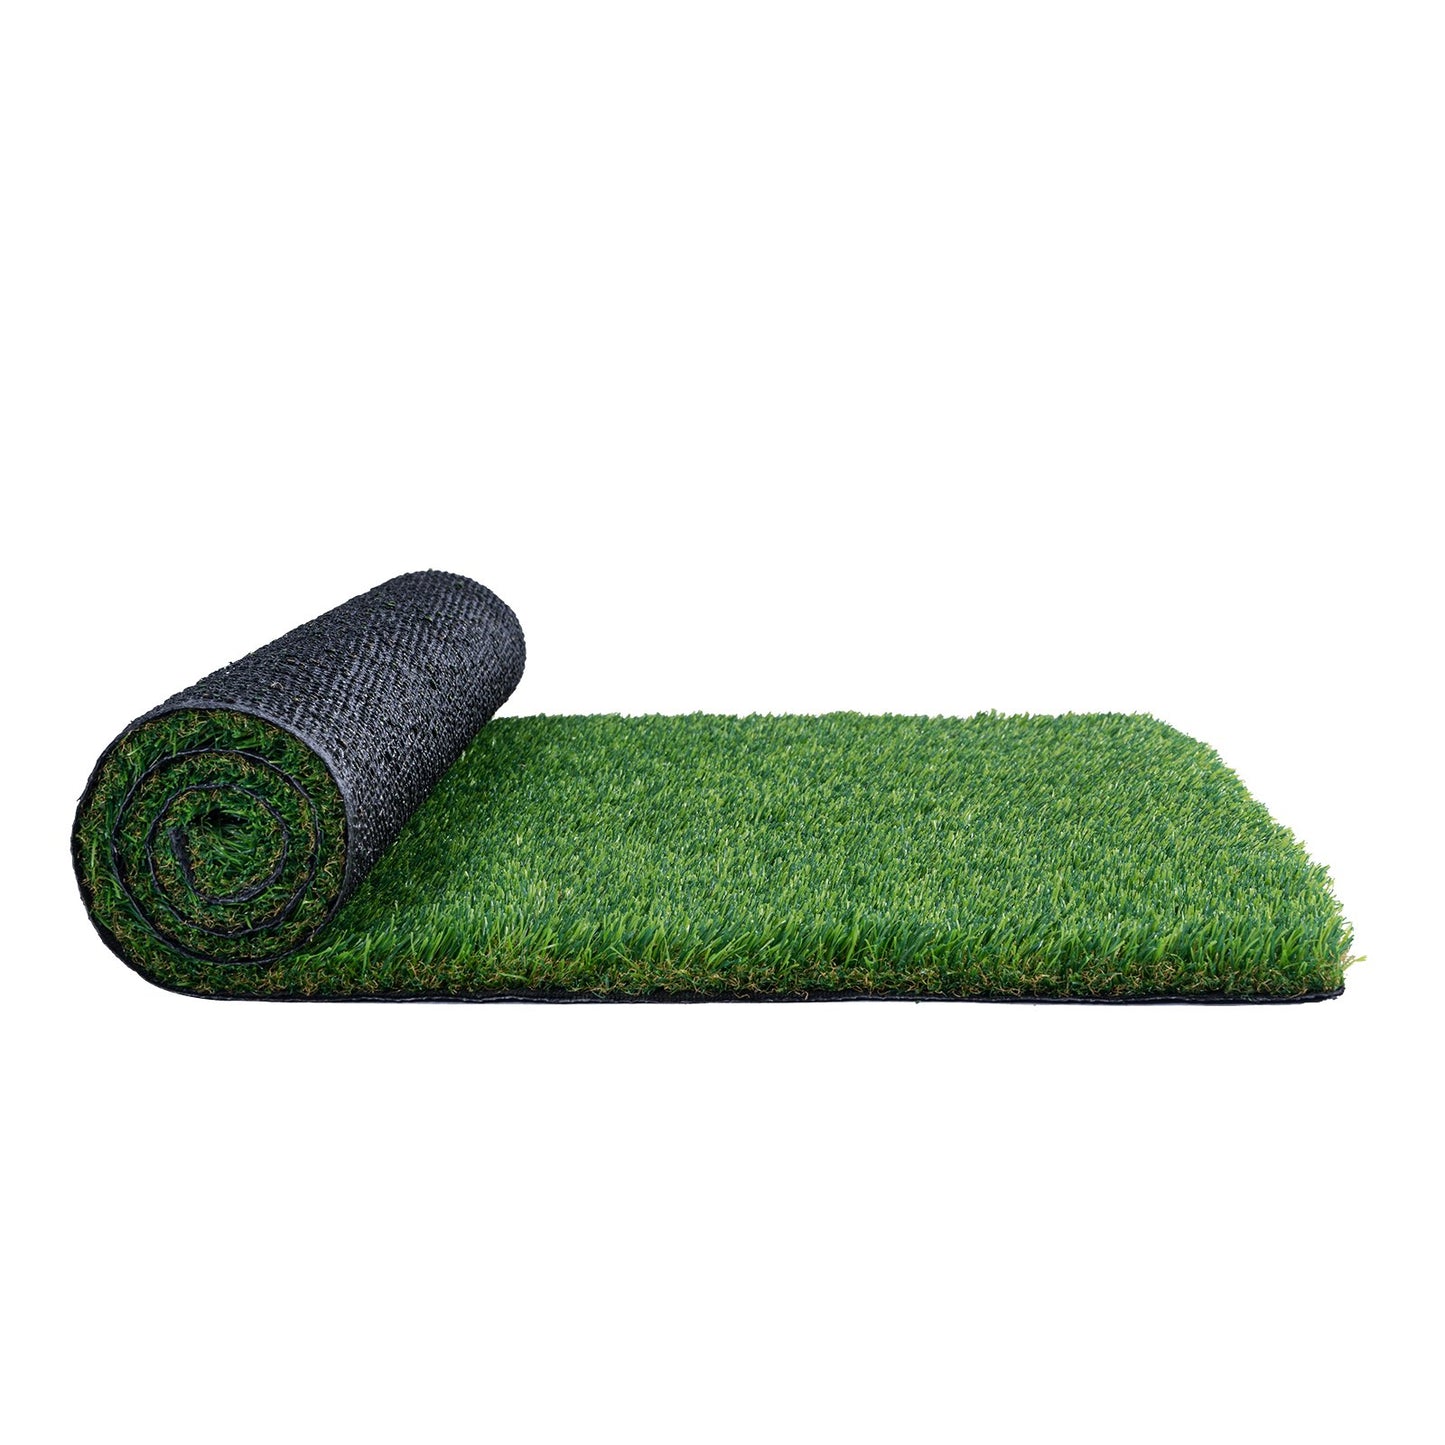 VEVOR Artifical Grass, 5 x 10 ft Rug Green Turf, 1.38"Fake Door Mat Outdoor Patio Lawn Decoration, Easy to Clean with Drainage Holes, Perfect For Multi-Purpose Home Indoor Entryway Scraper Dog Mats-7